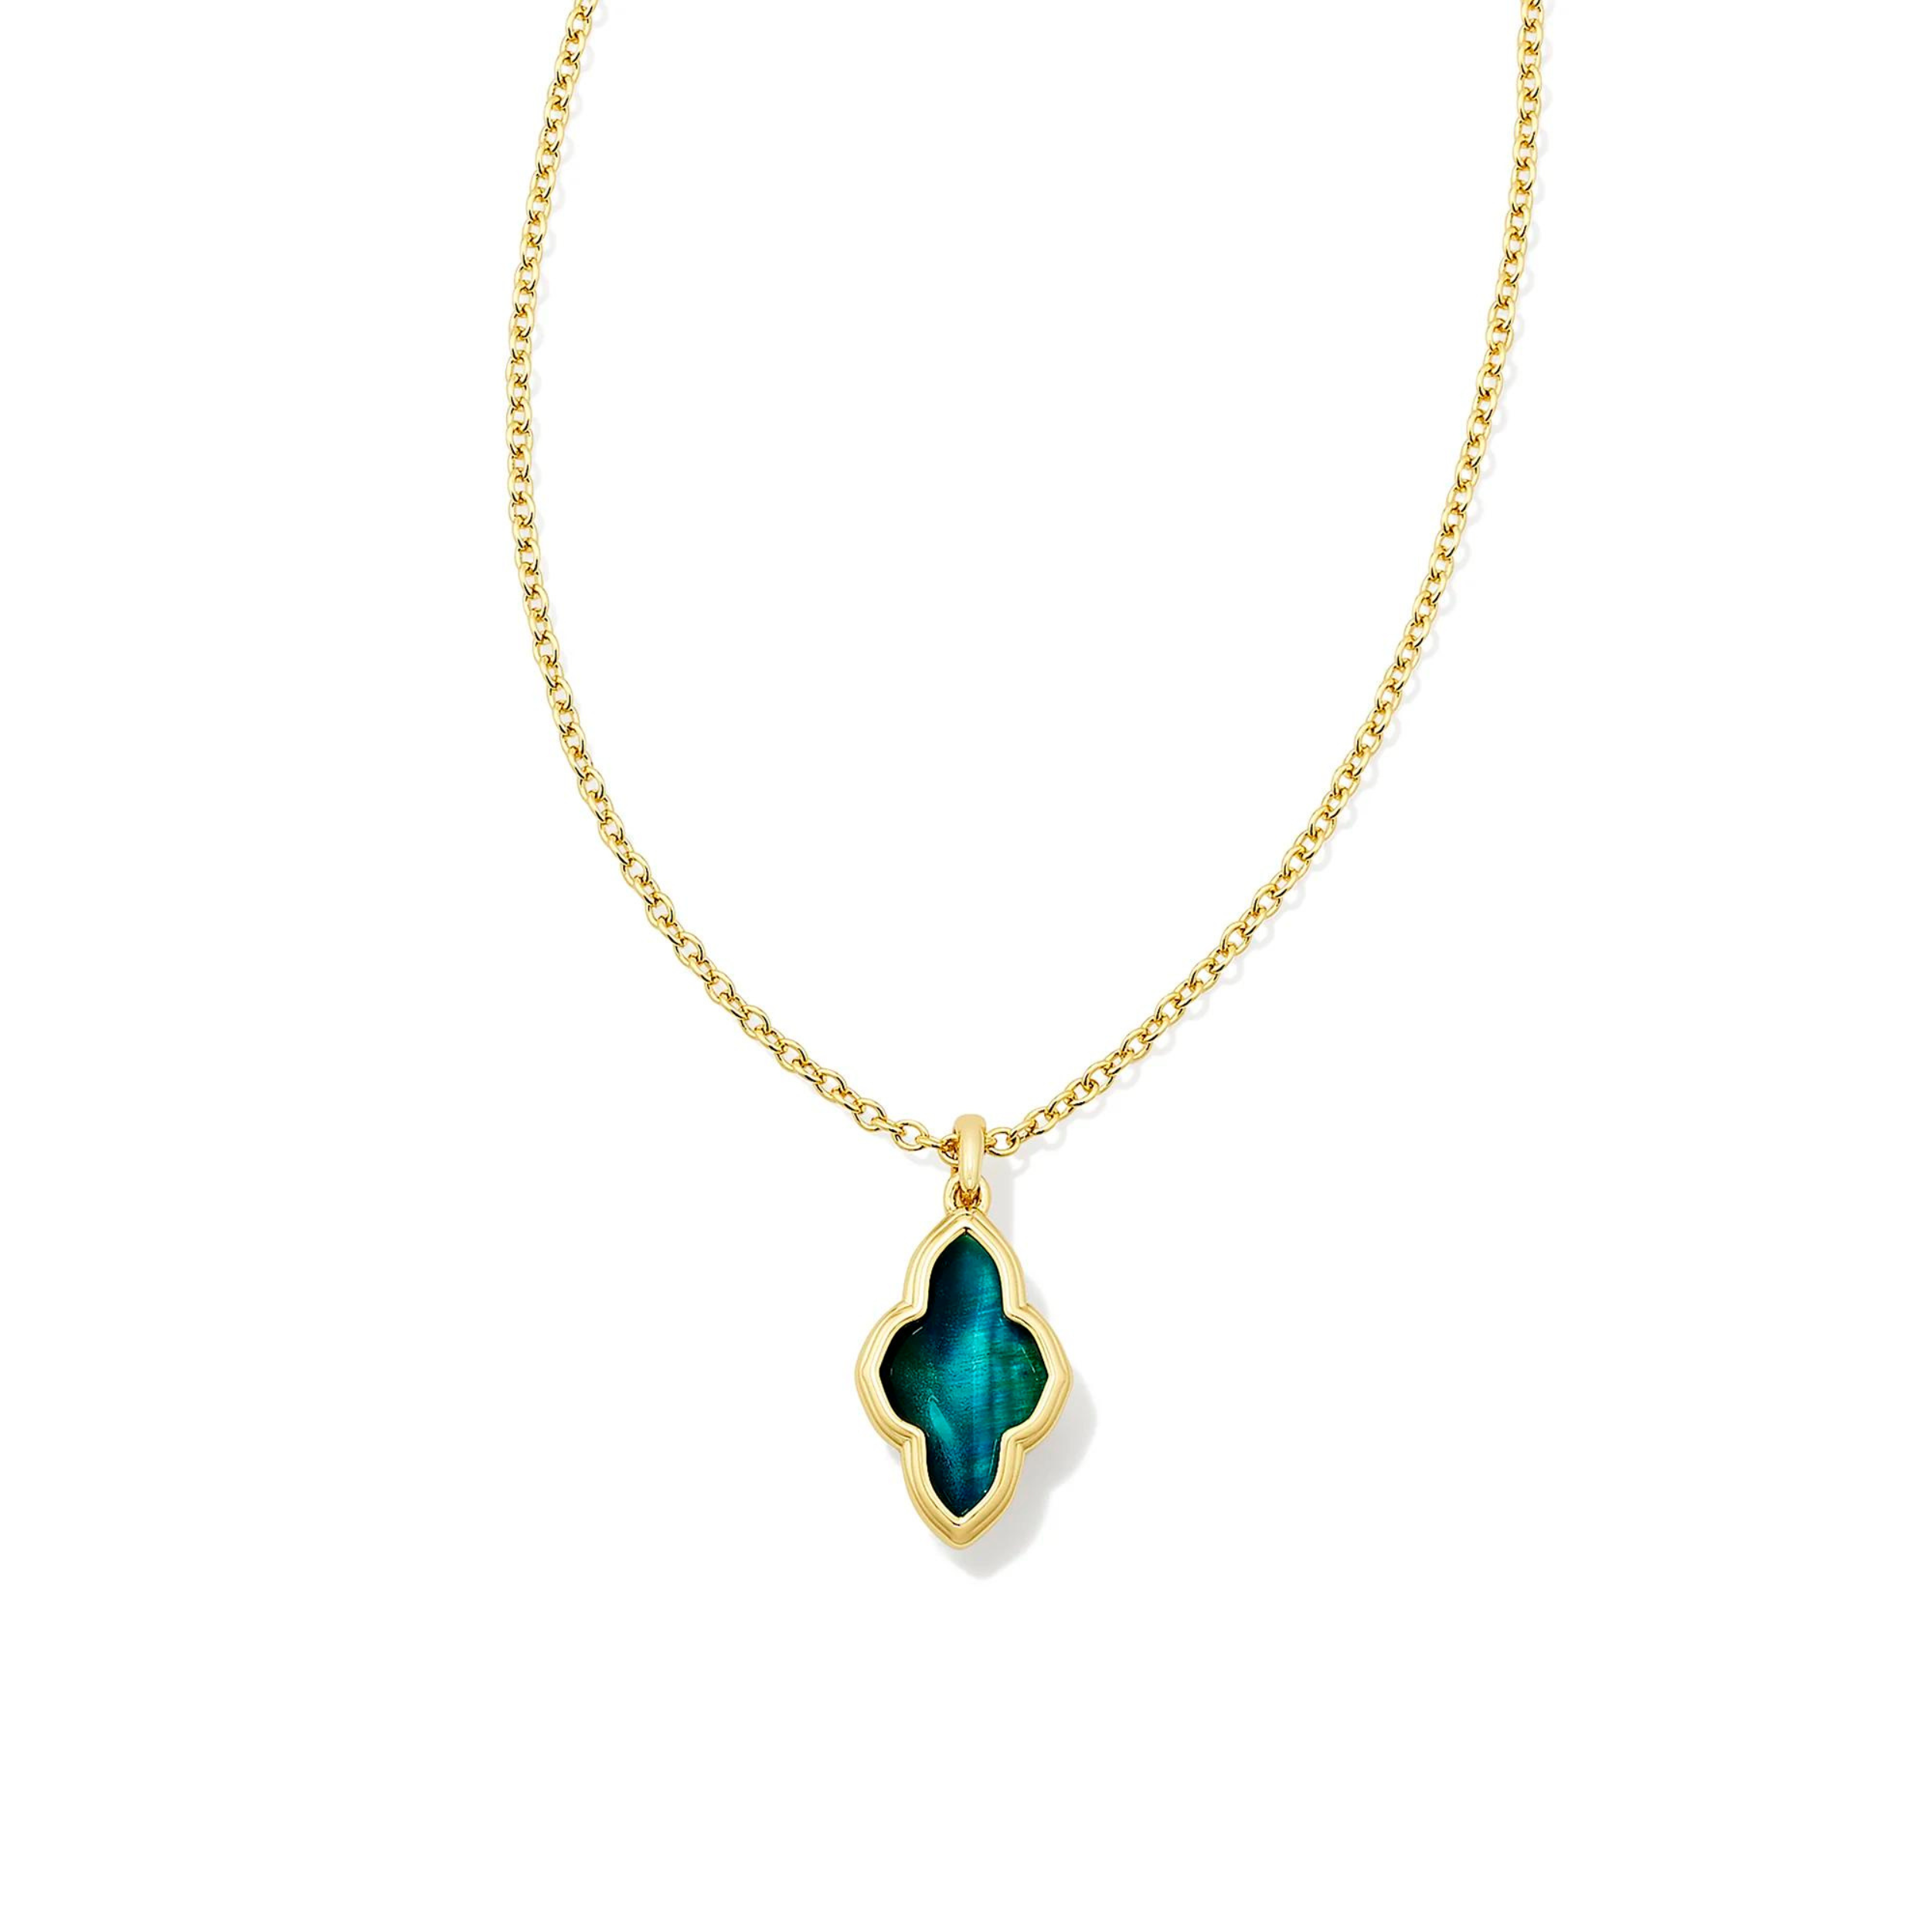 Pictured is a gold chain necklace with an abbie shaped necklace on a white background. This necklace includes a gold outline with a teal tiger's eye stone.  